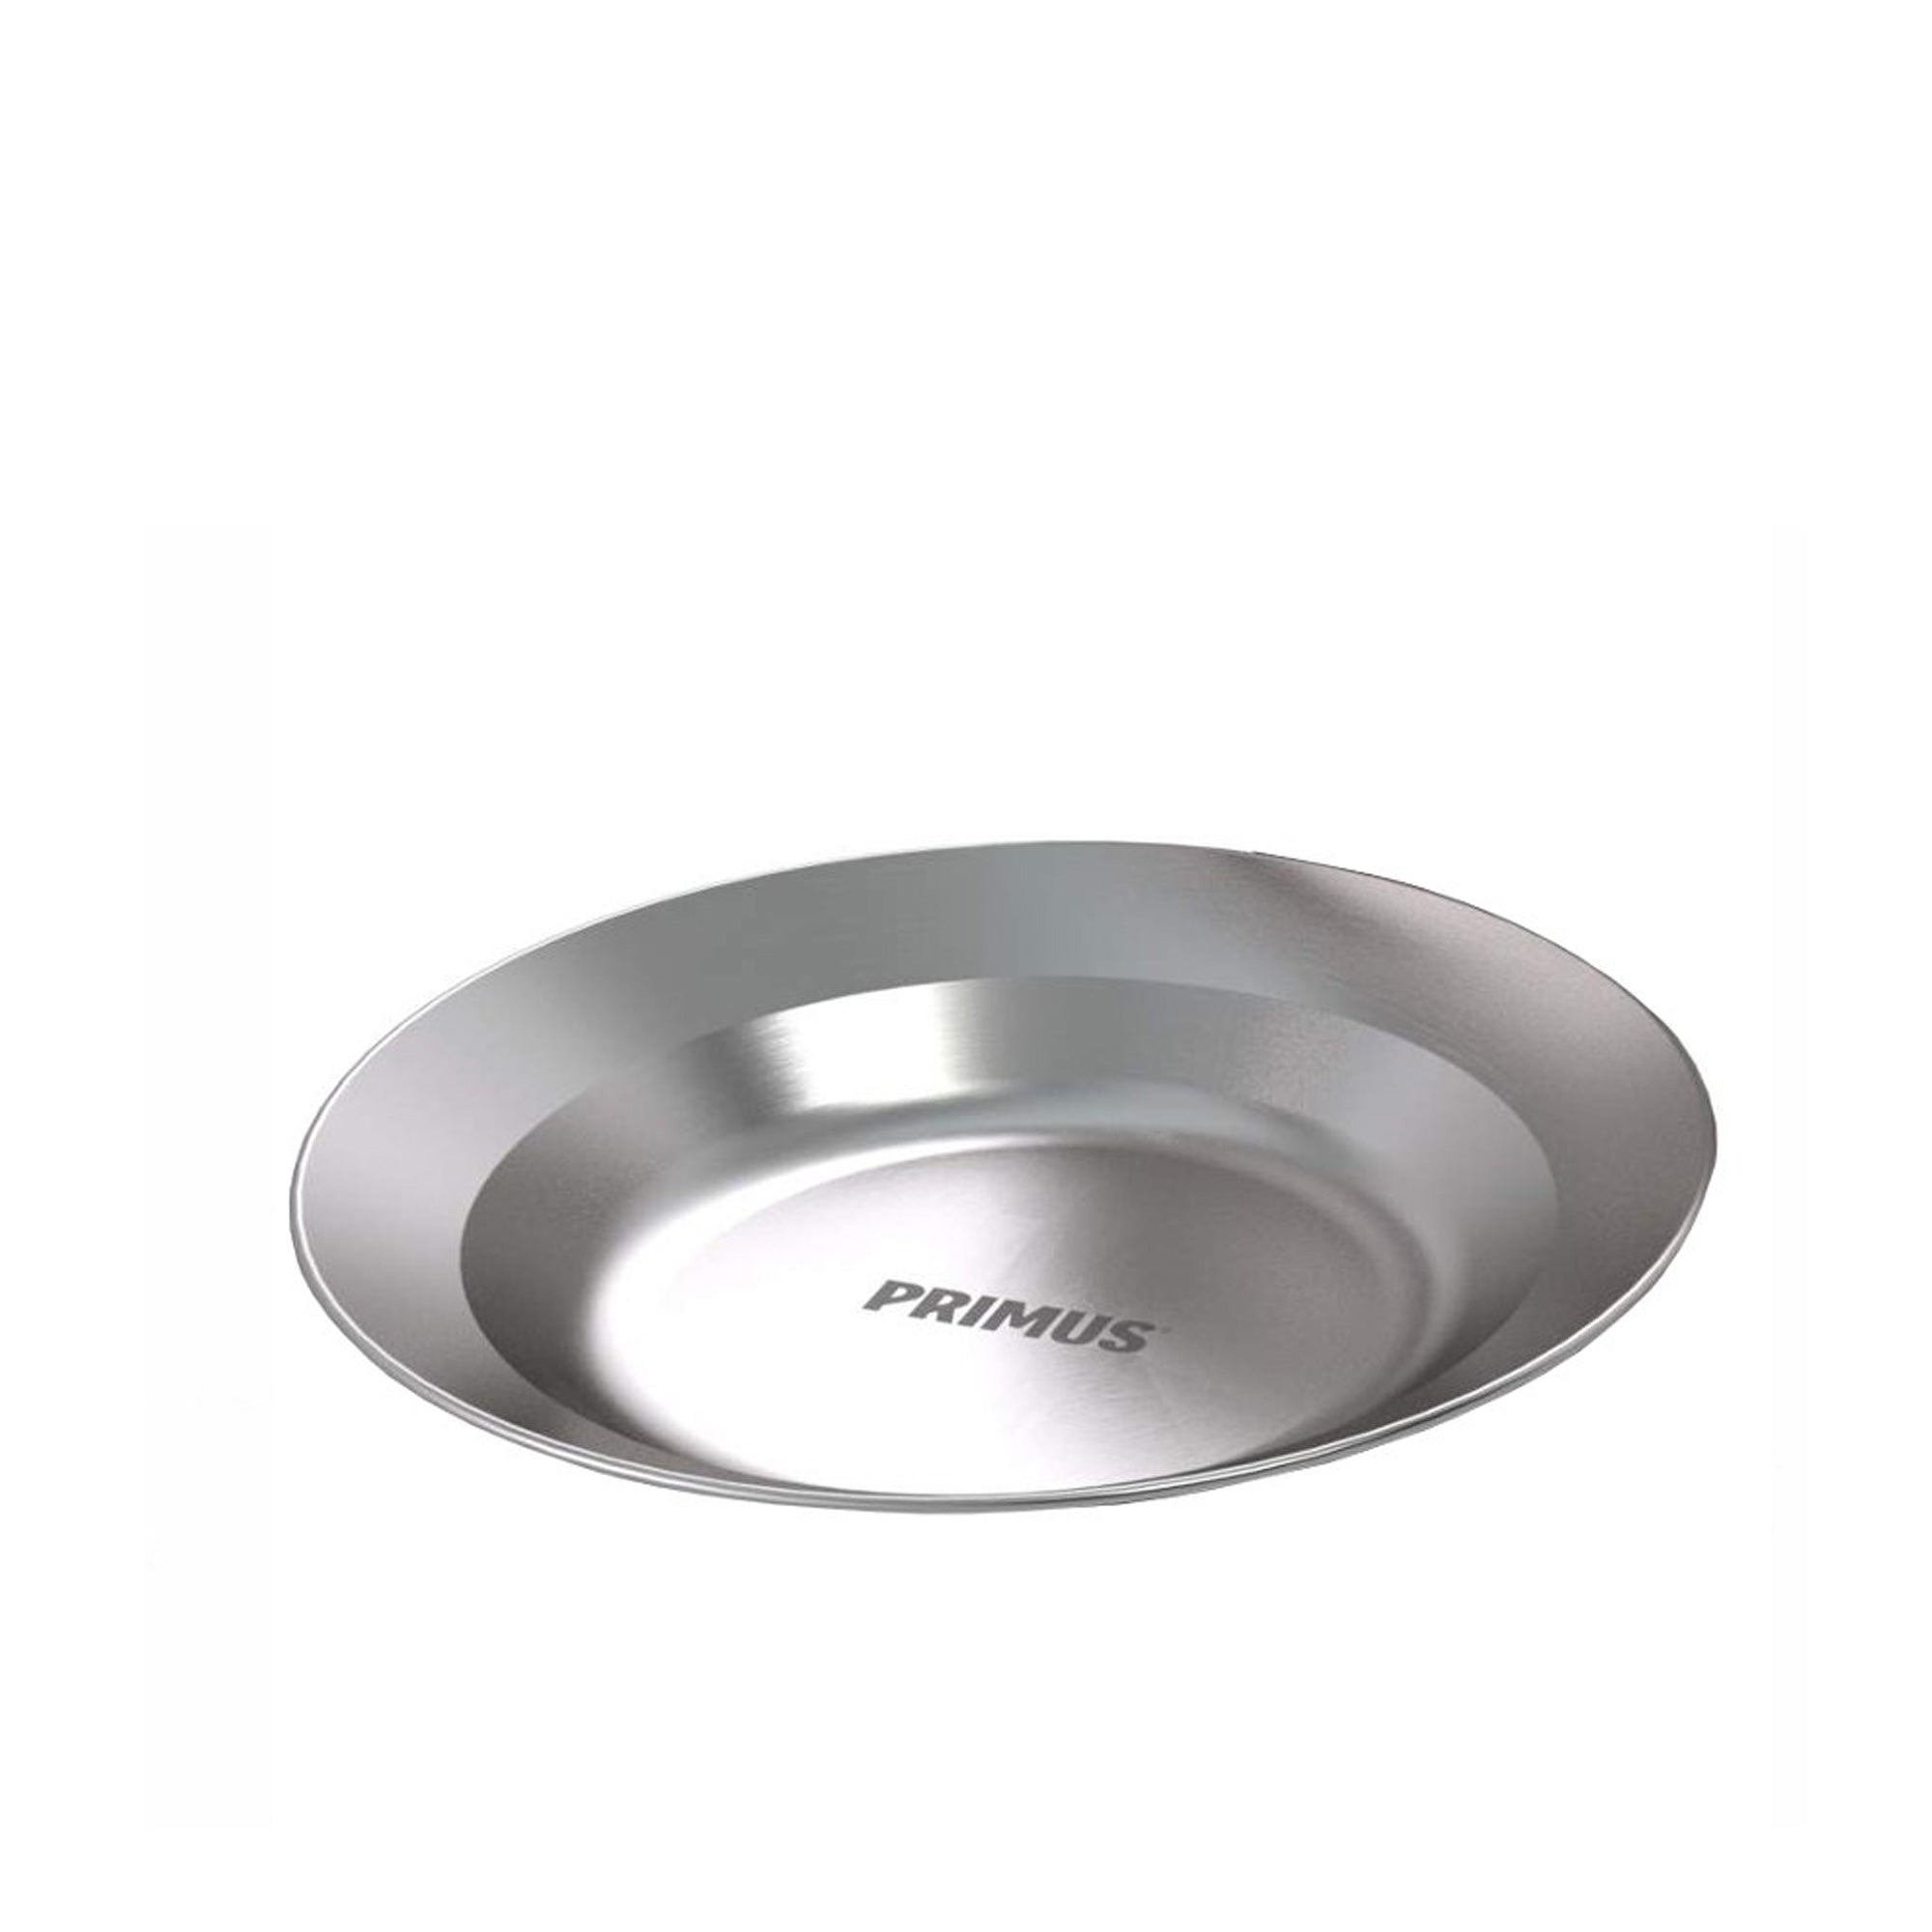 Primus Stainless Steel Plate